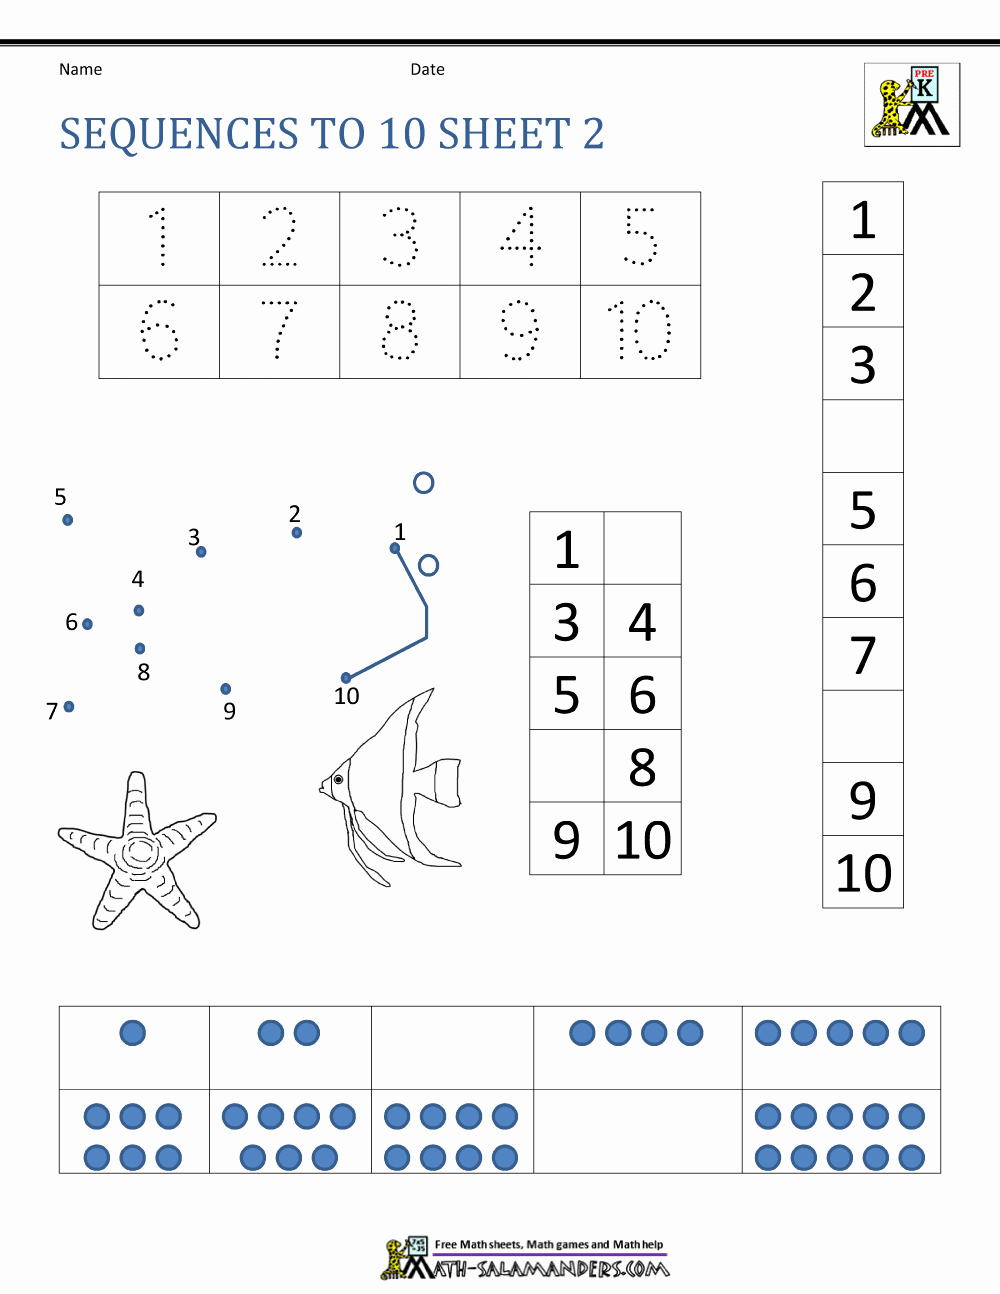 Sequence Worksheets 5th Grade Awesome Math Sequencing Worksheets 5th Grade Sequences and